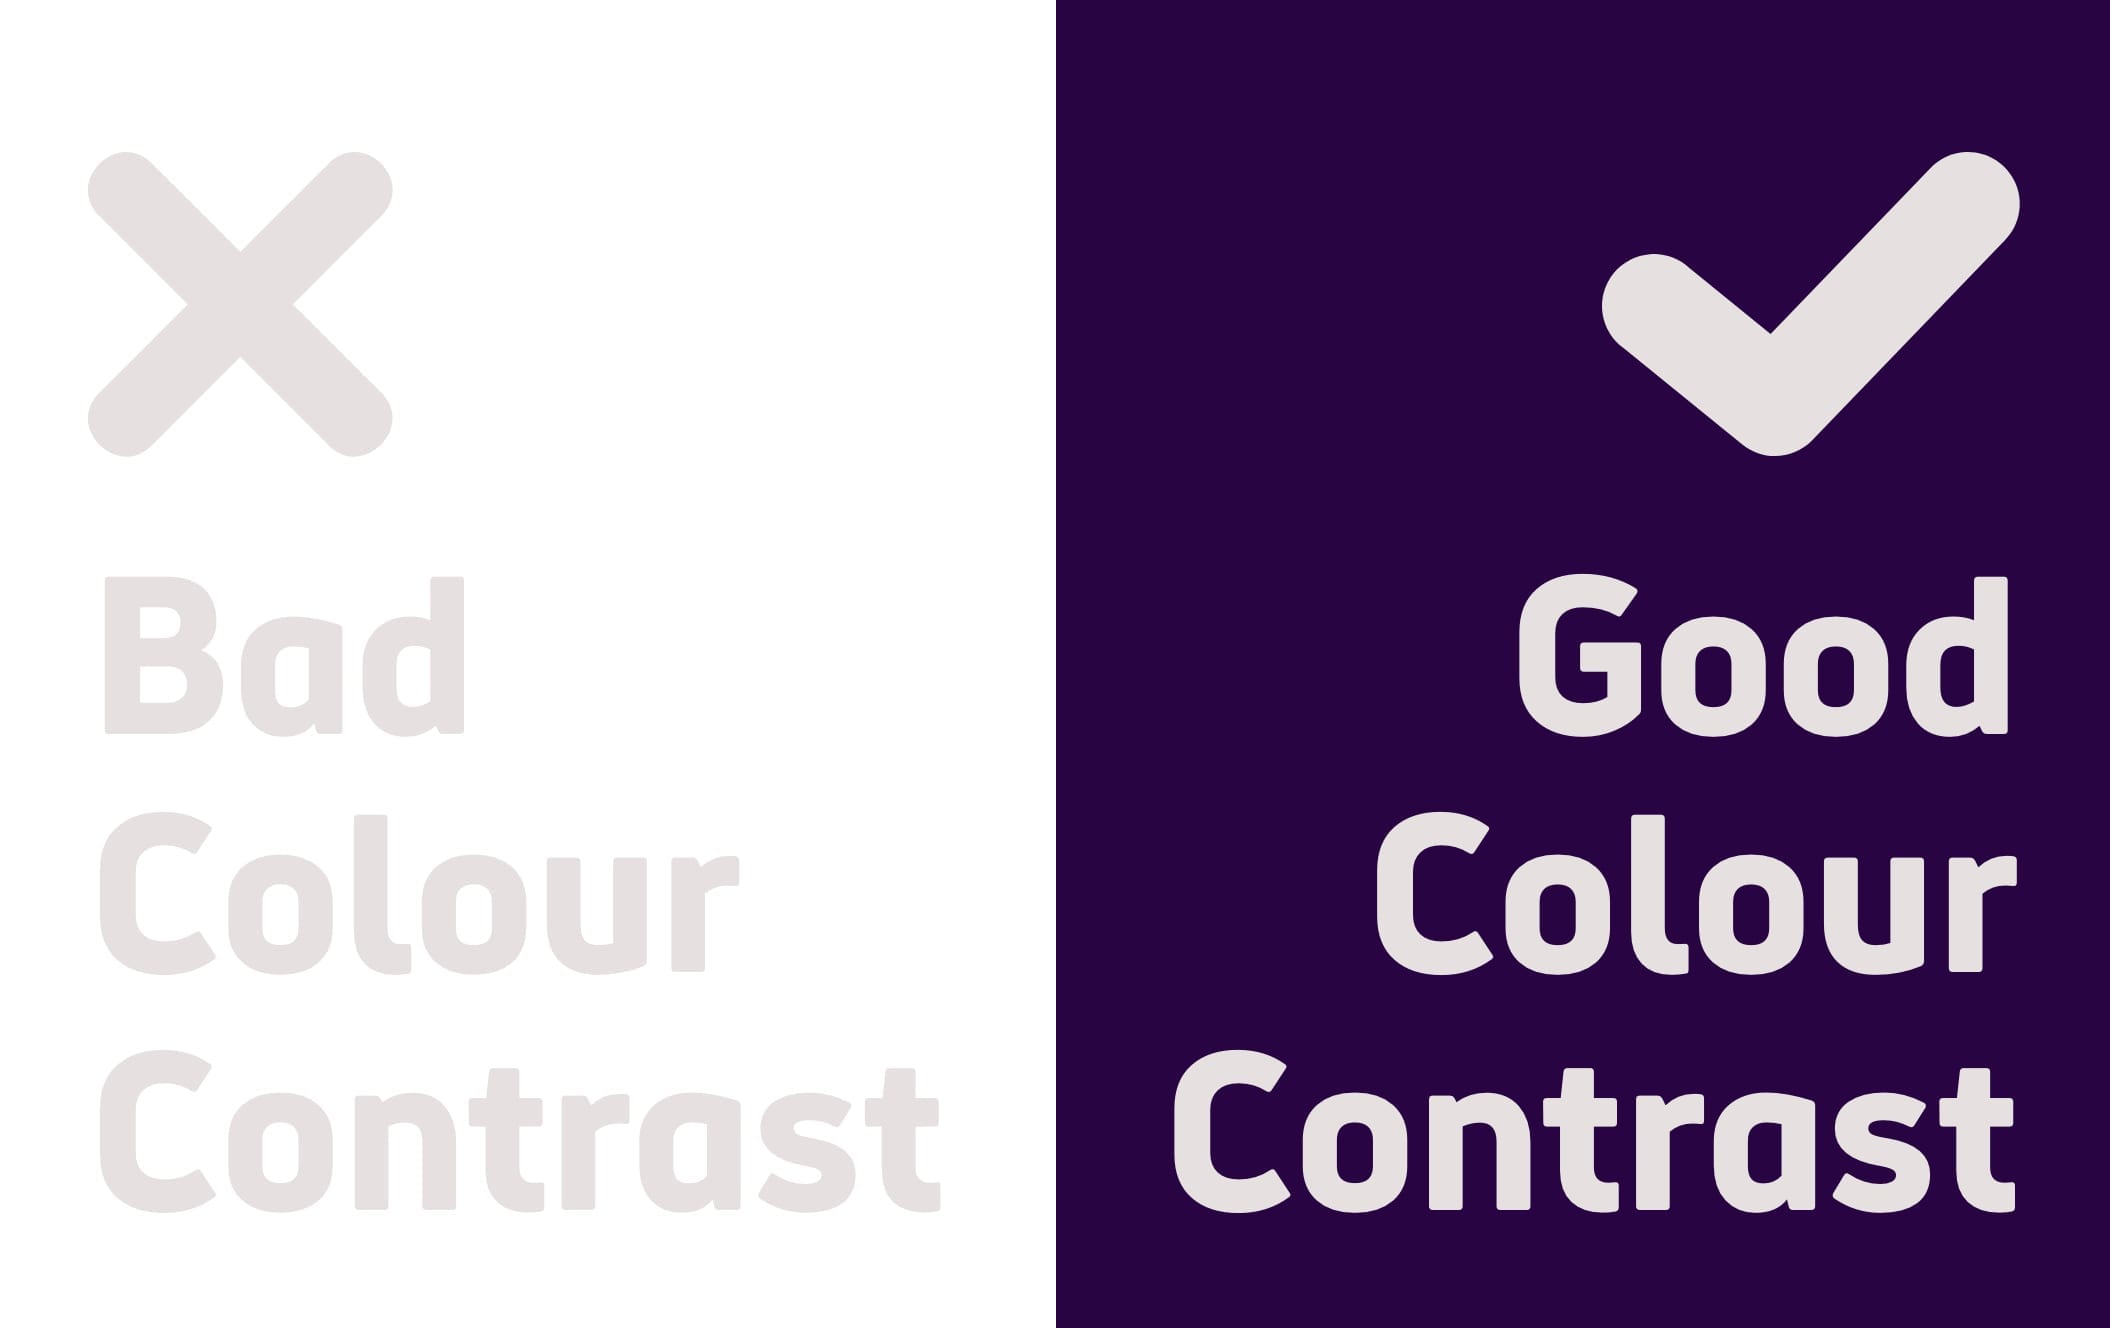 Example of good and bad colour contrast combinations for accessibility. On the left is light grey text on a white background. On the right is an example of good colour contrast with off-white text on a dark purple background.